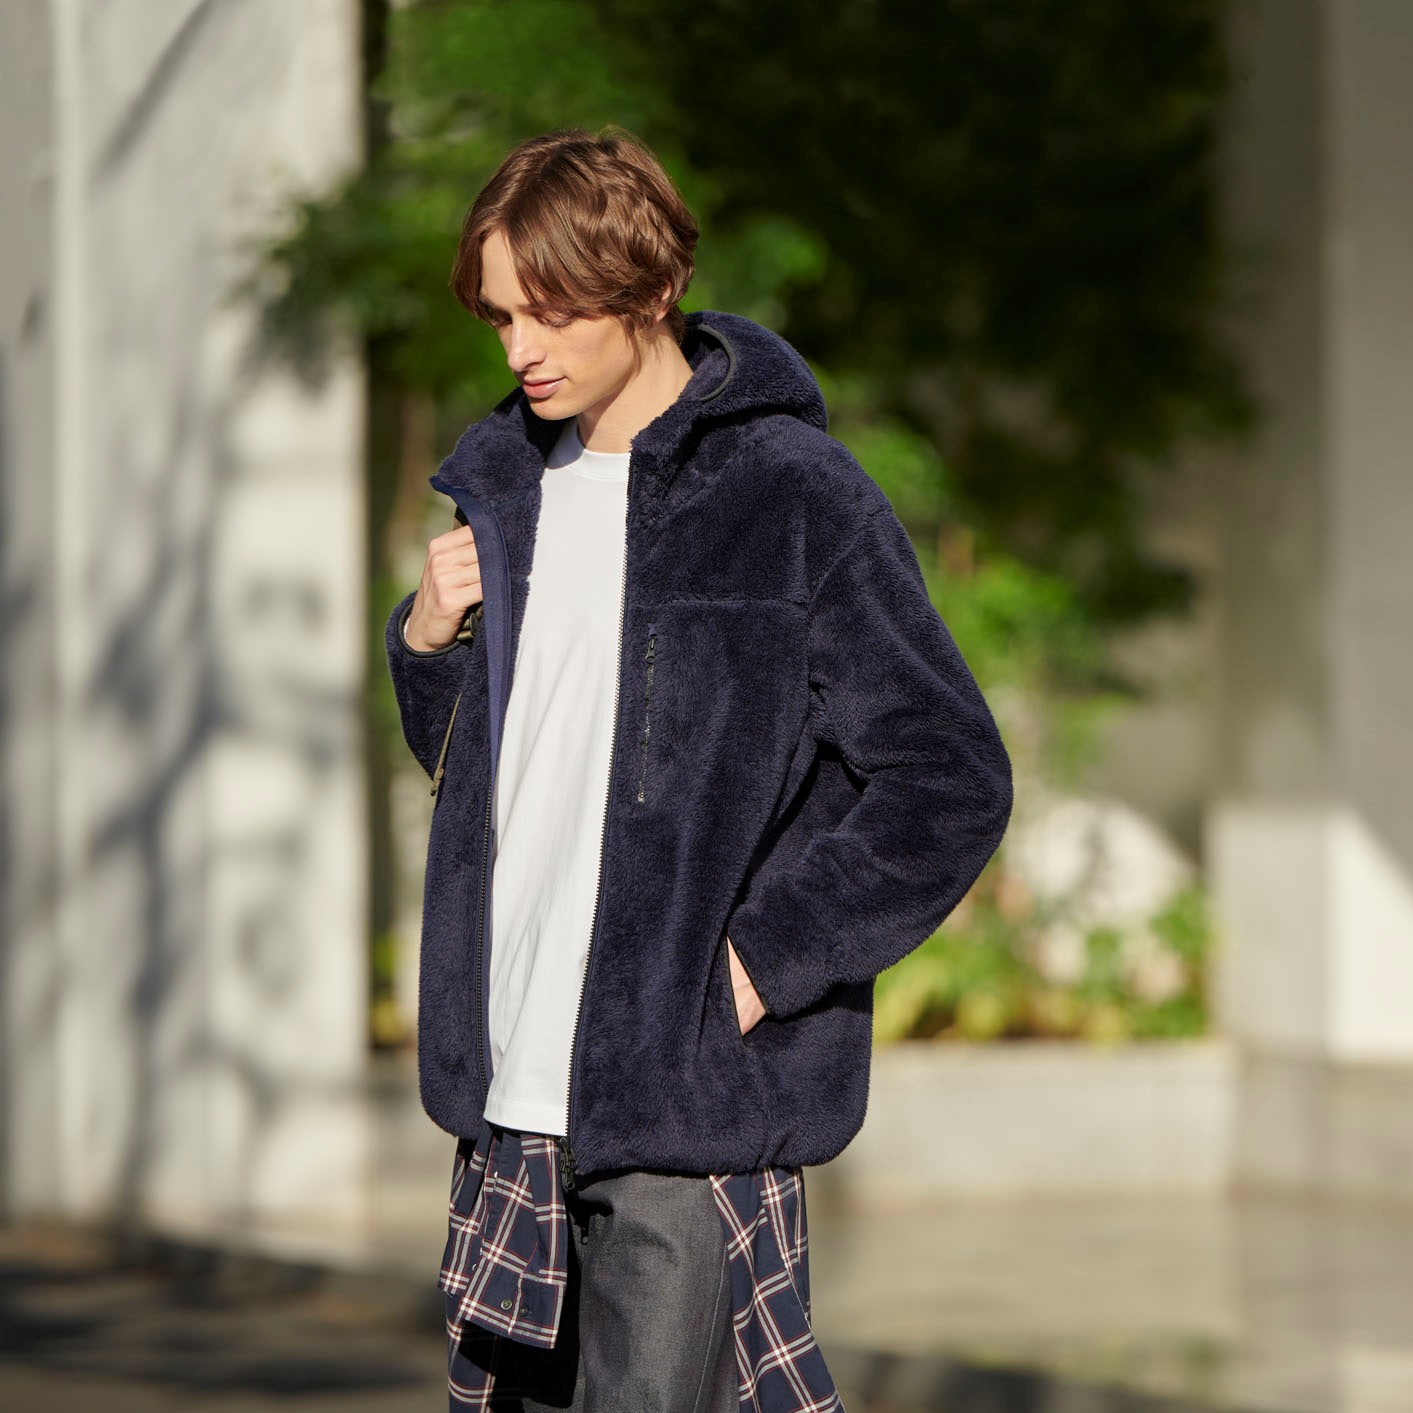 UNIQLO on X: Stay warm out there with our Windproof Fluffy Fleece